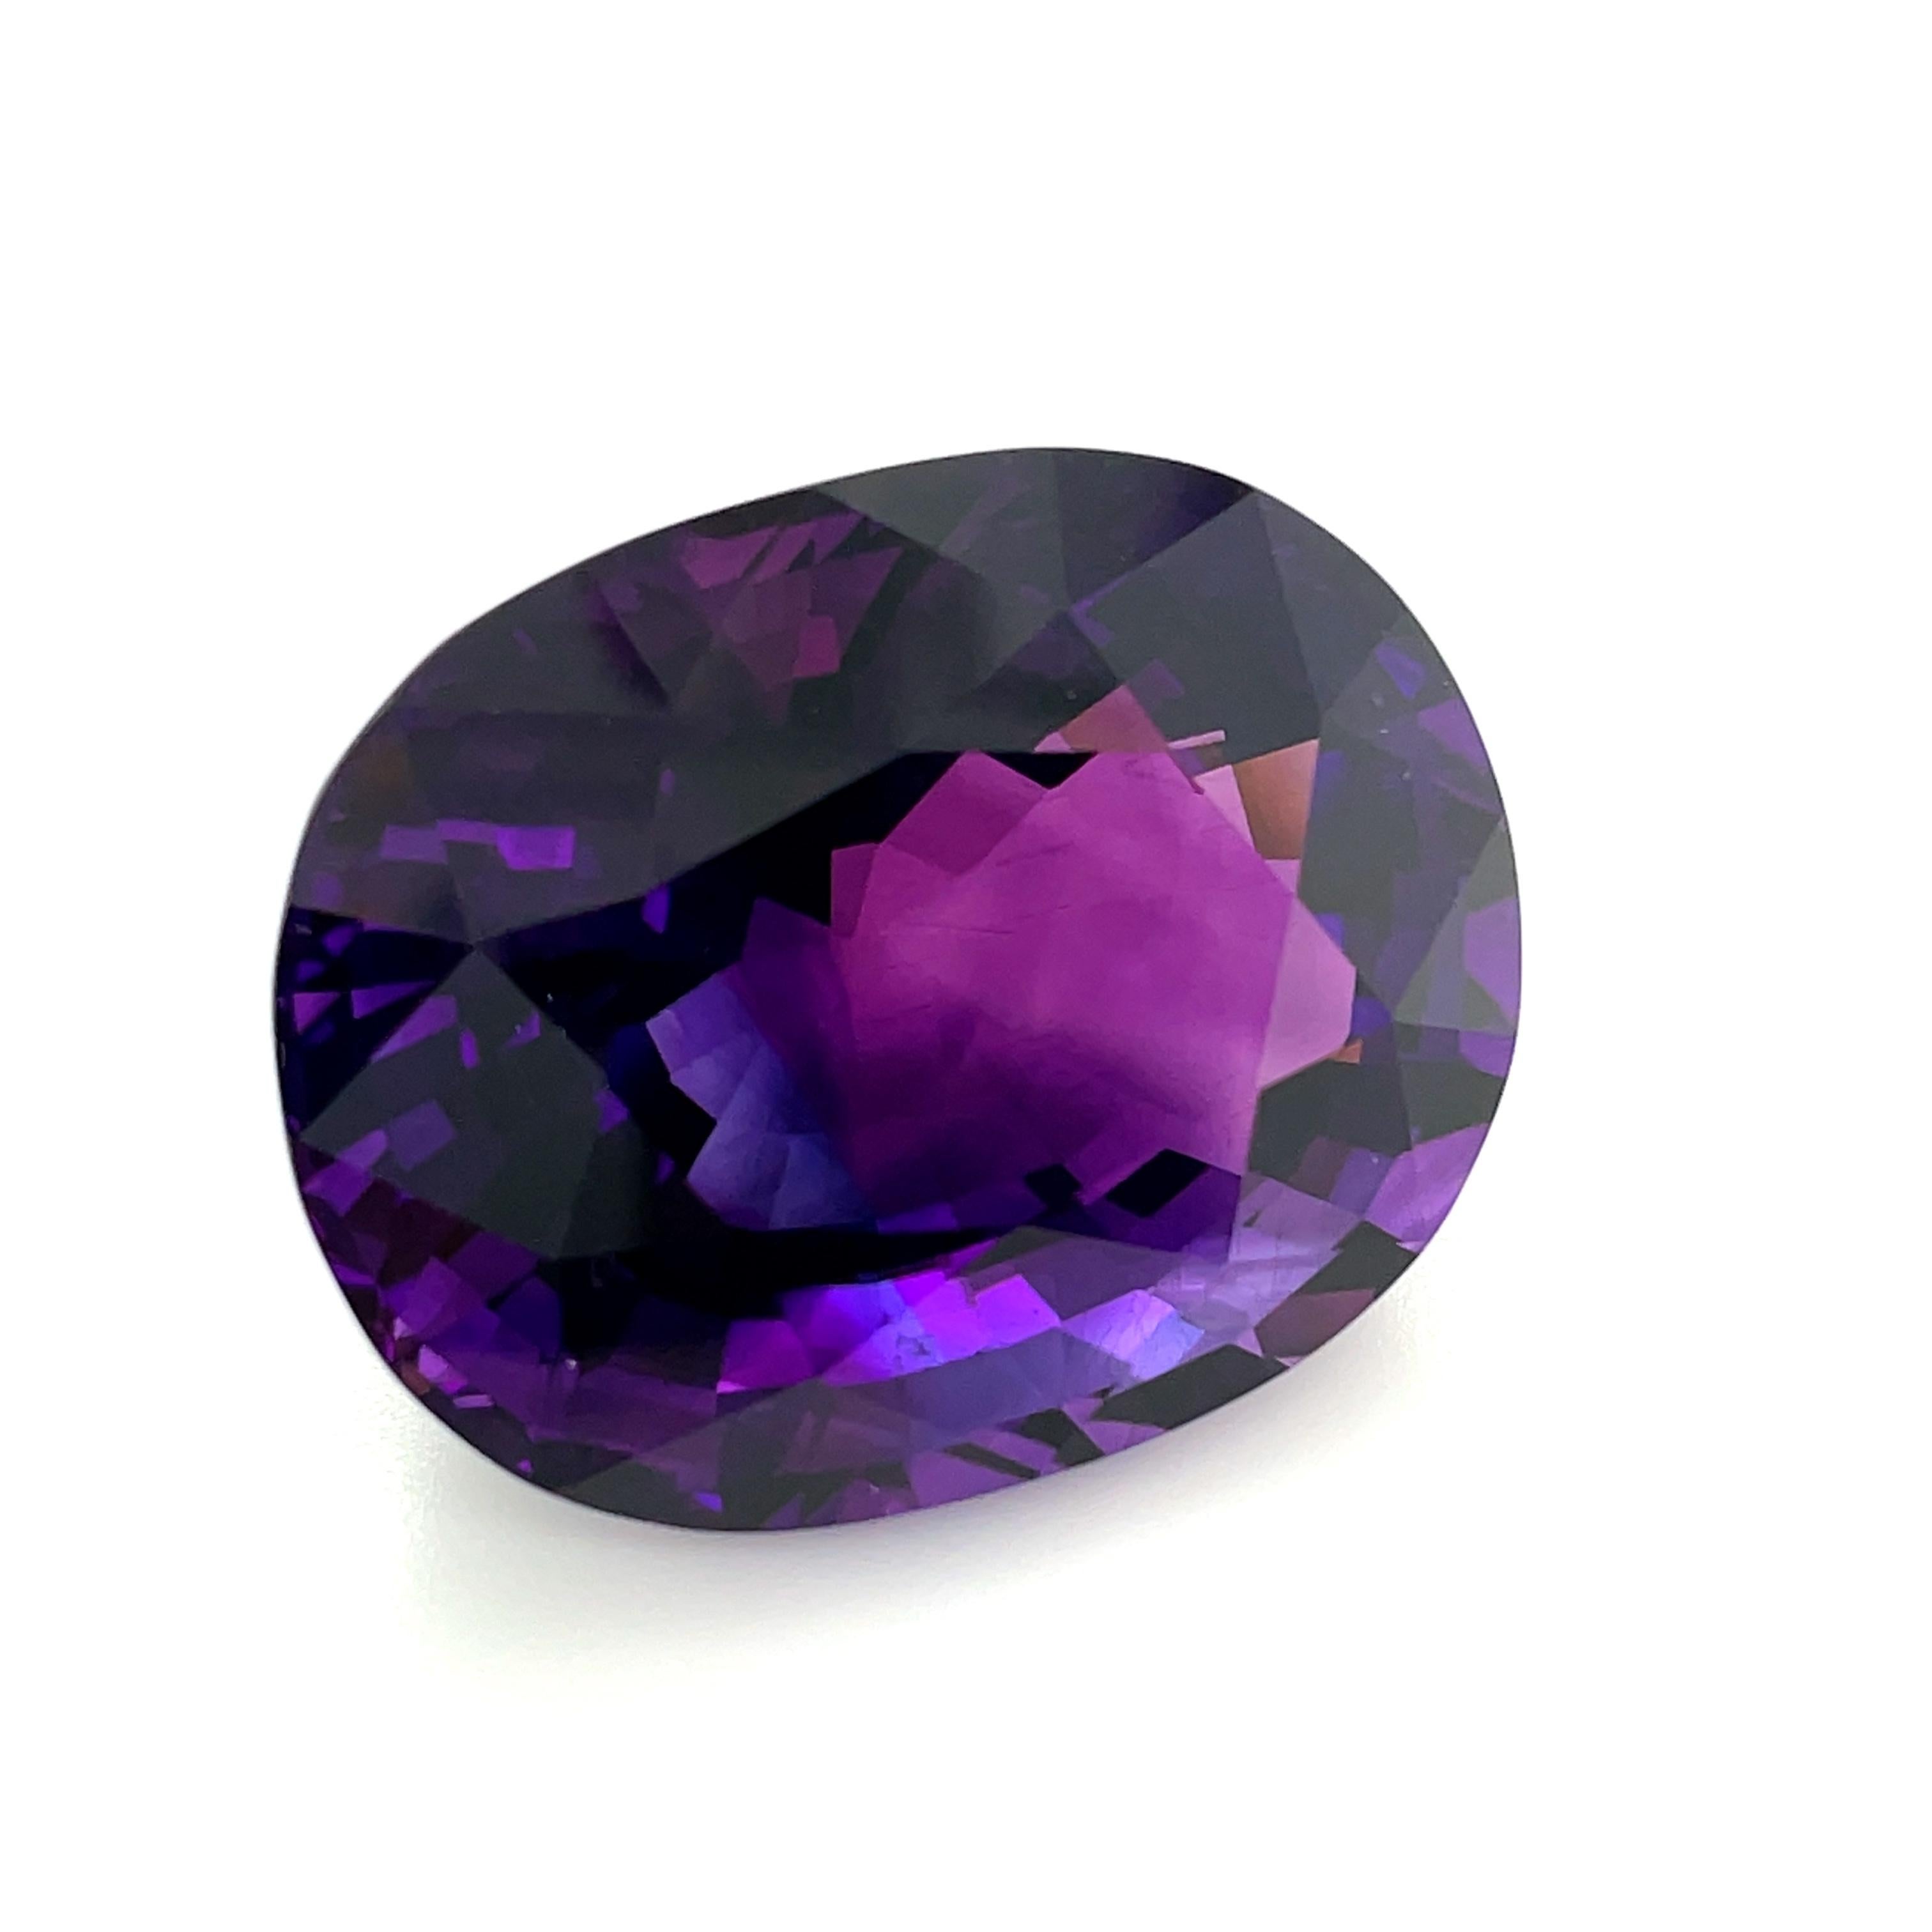 This luscious royal purple amethyst weighs 65.49 carats and would make a perfectly regal and eye-catching pendant! It is beautifully faceted and crystal clean, with velvety rich purple color and both pinkish-purple and bluish-purple highlights. This